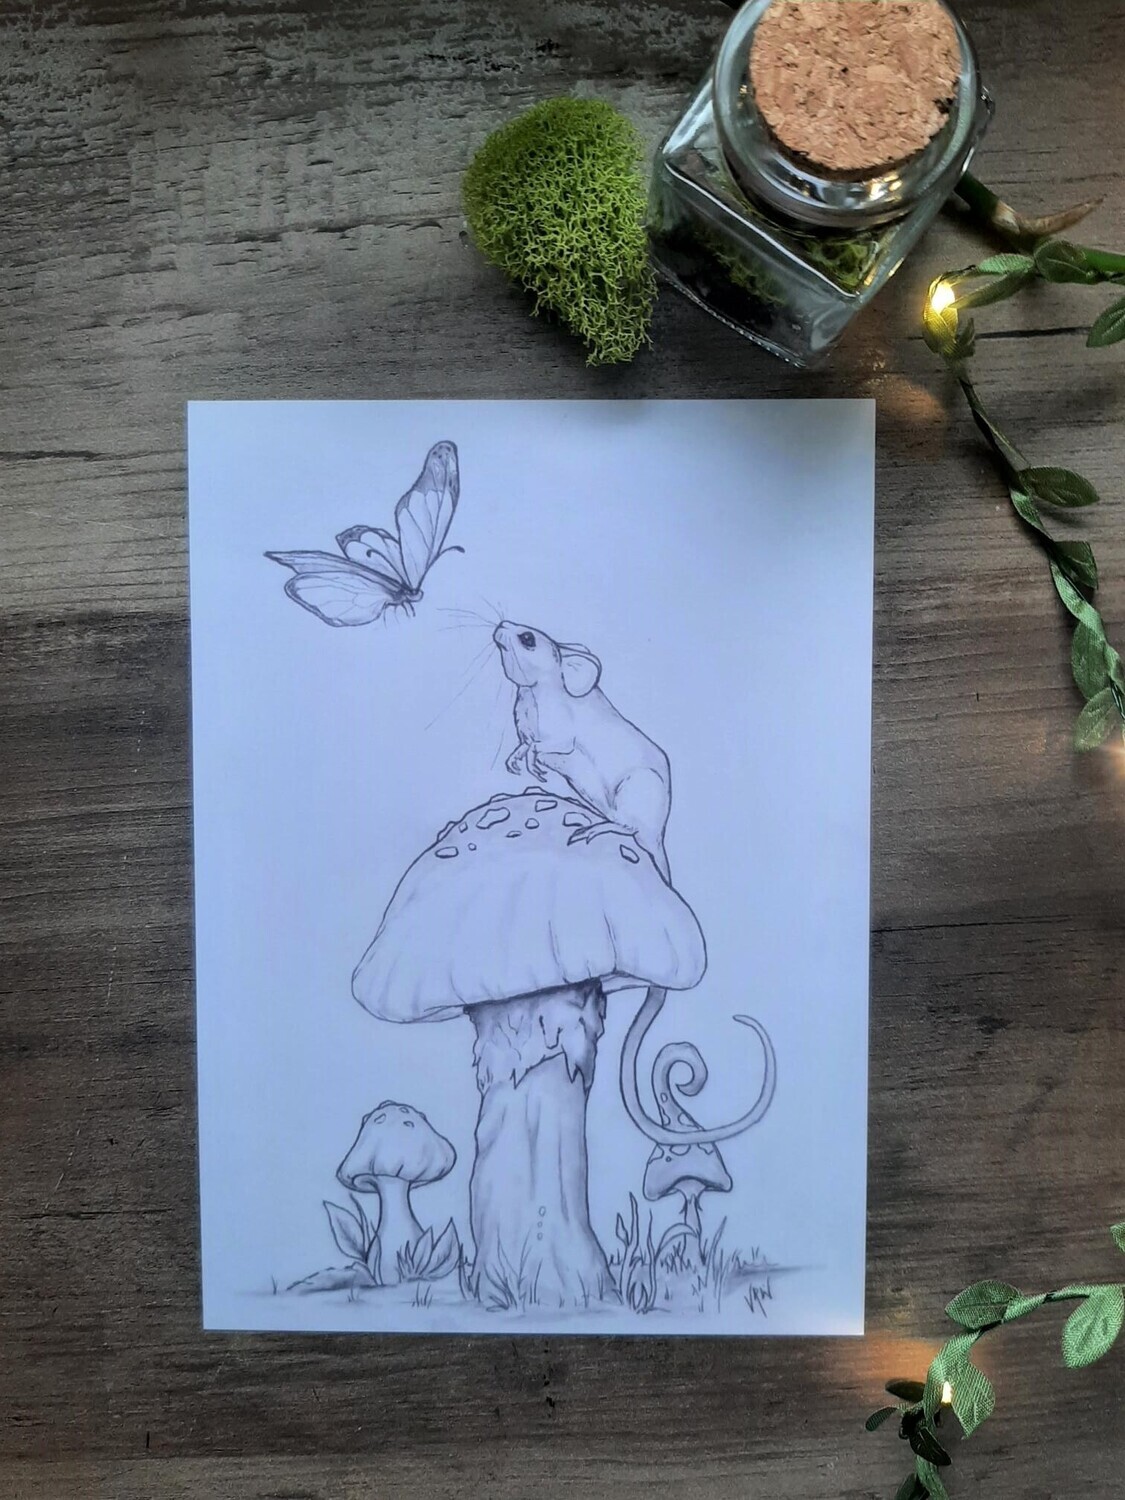 I Wish I Could Fly - Sketch Art Print